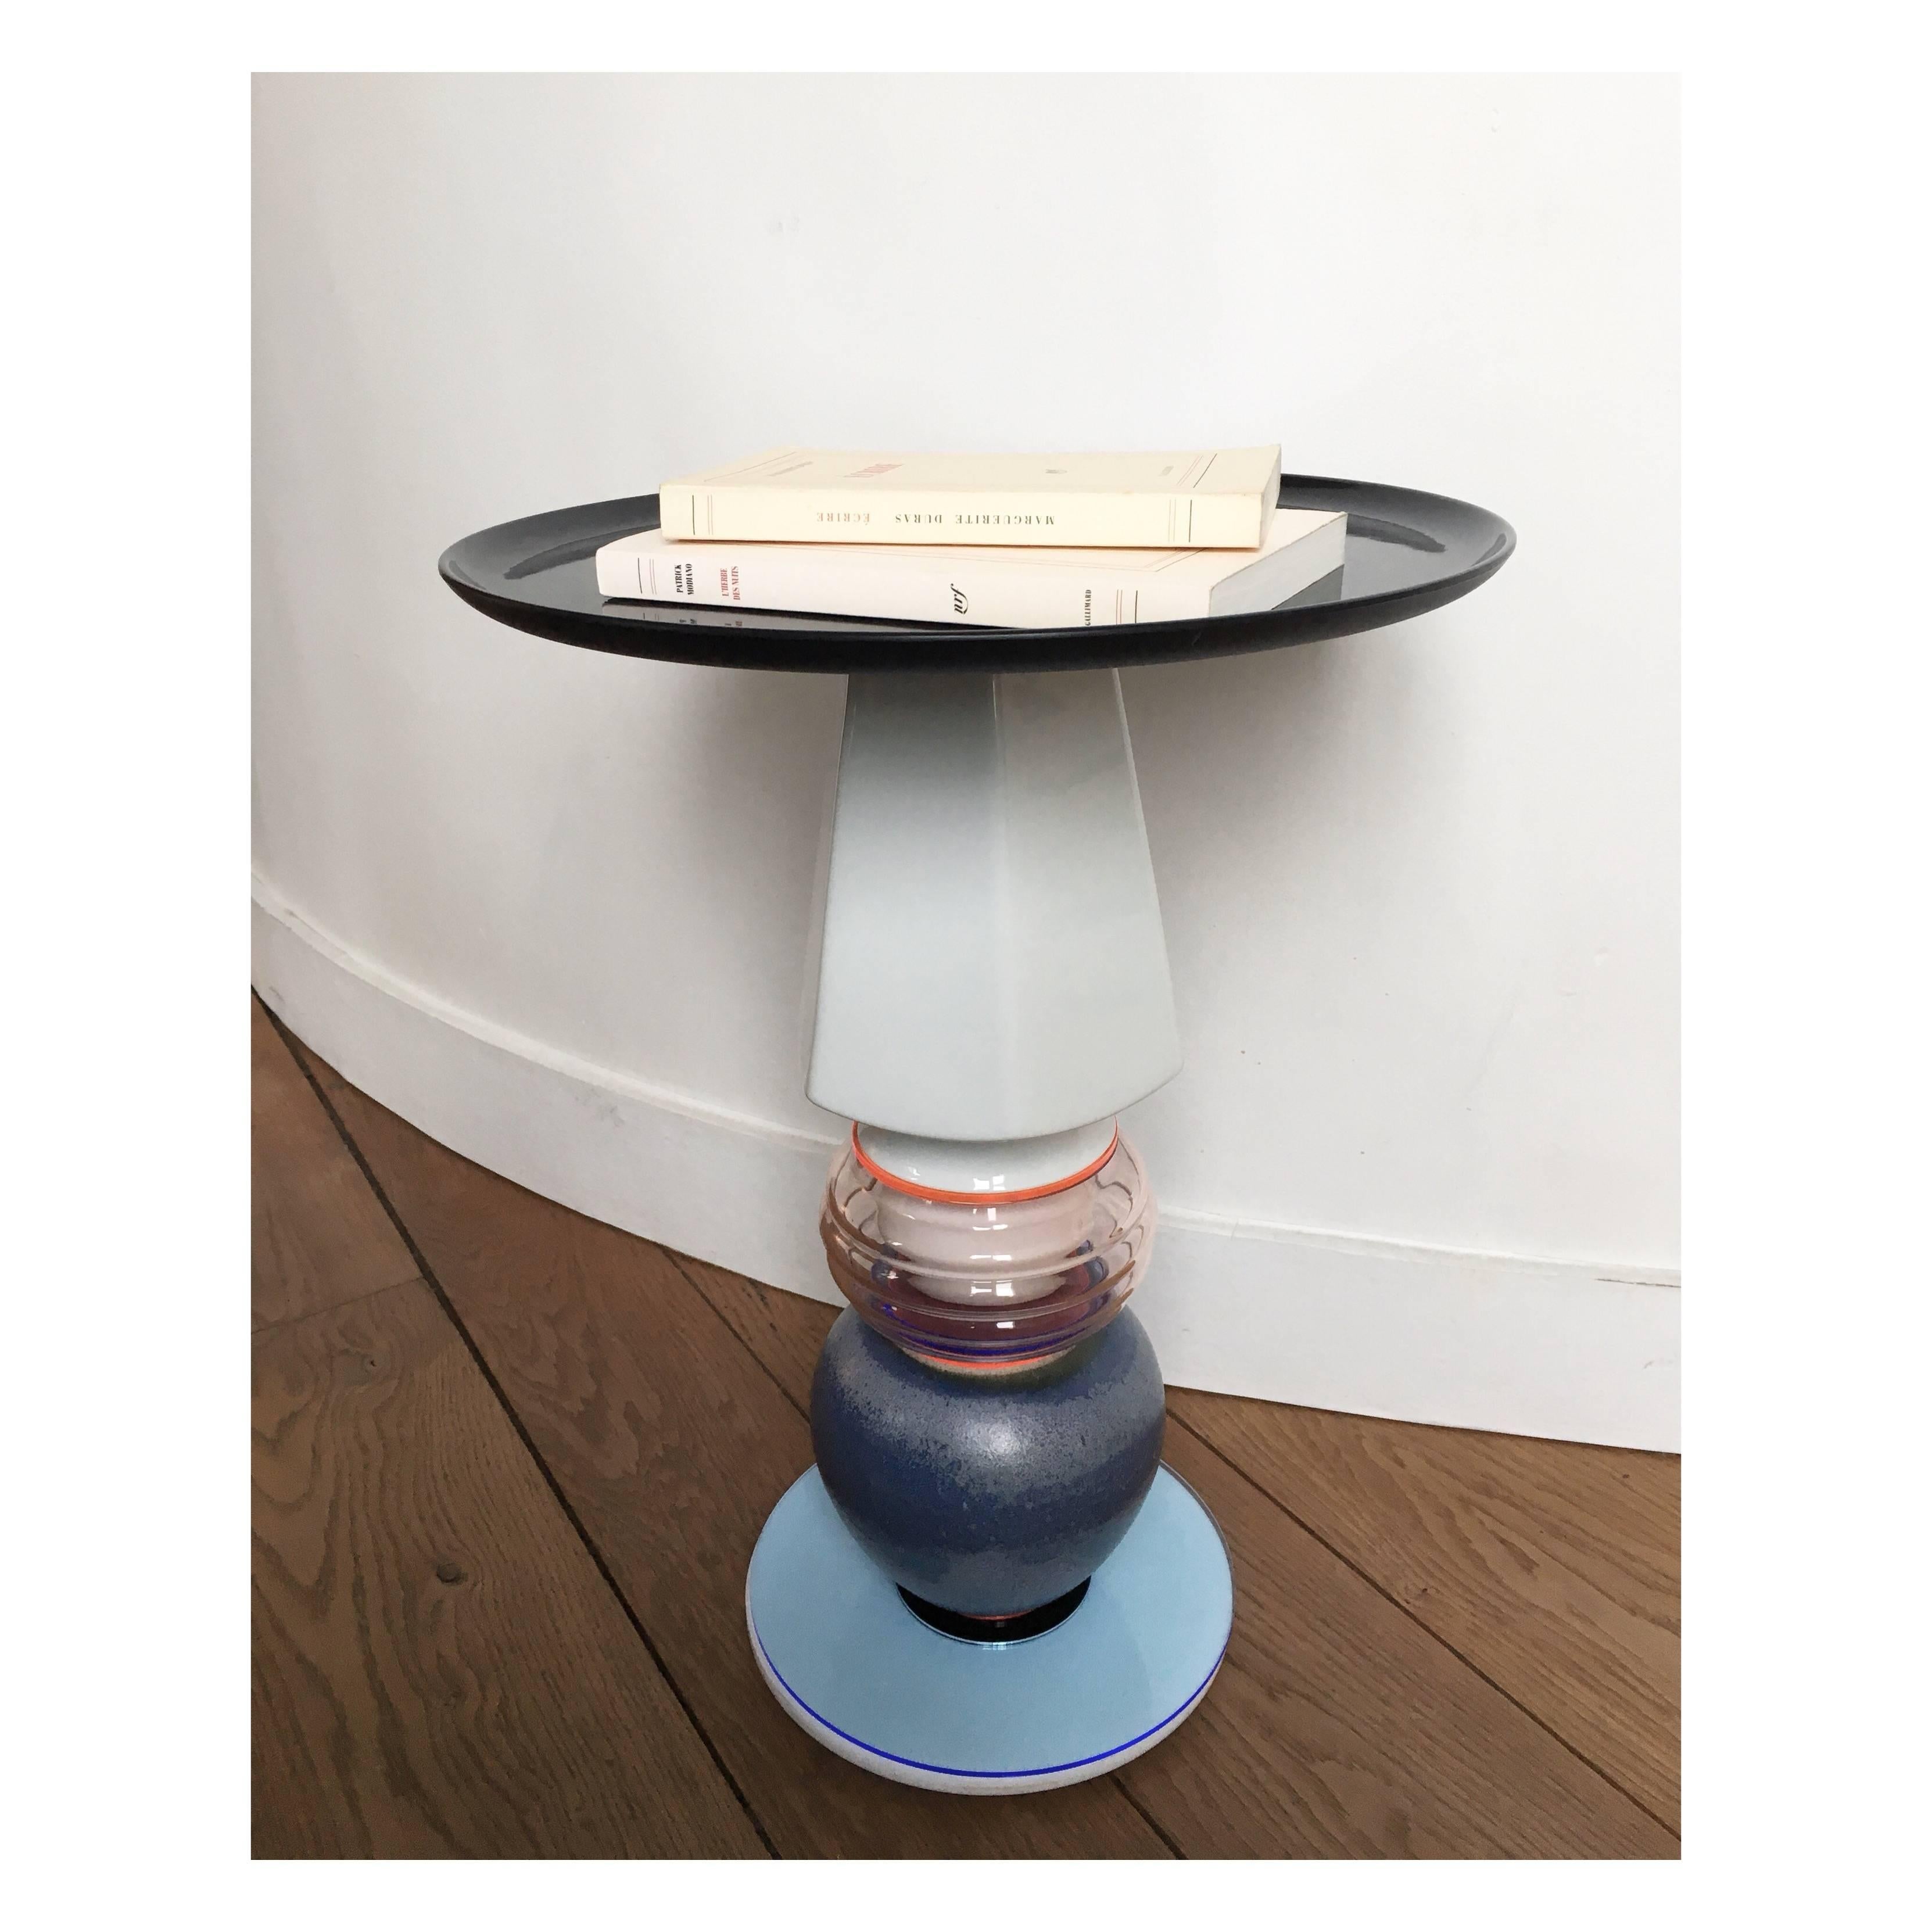 Mid-Century Modern 'Turn Me On' side table - Vintage ceramics and glass - One off piece